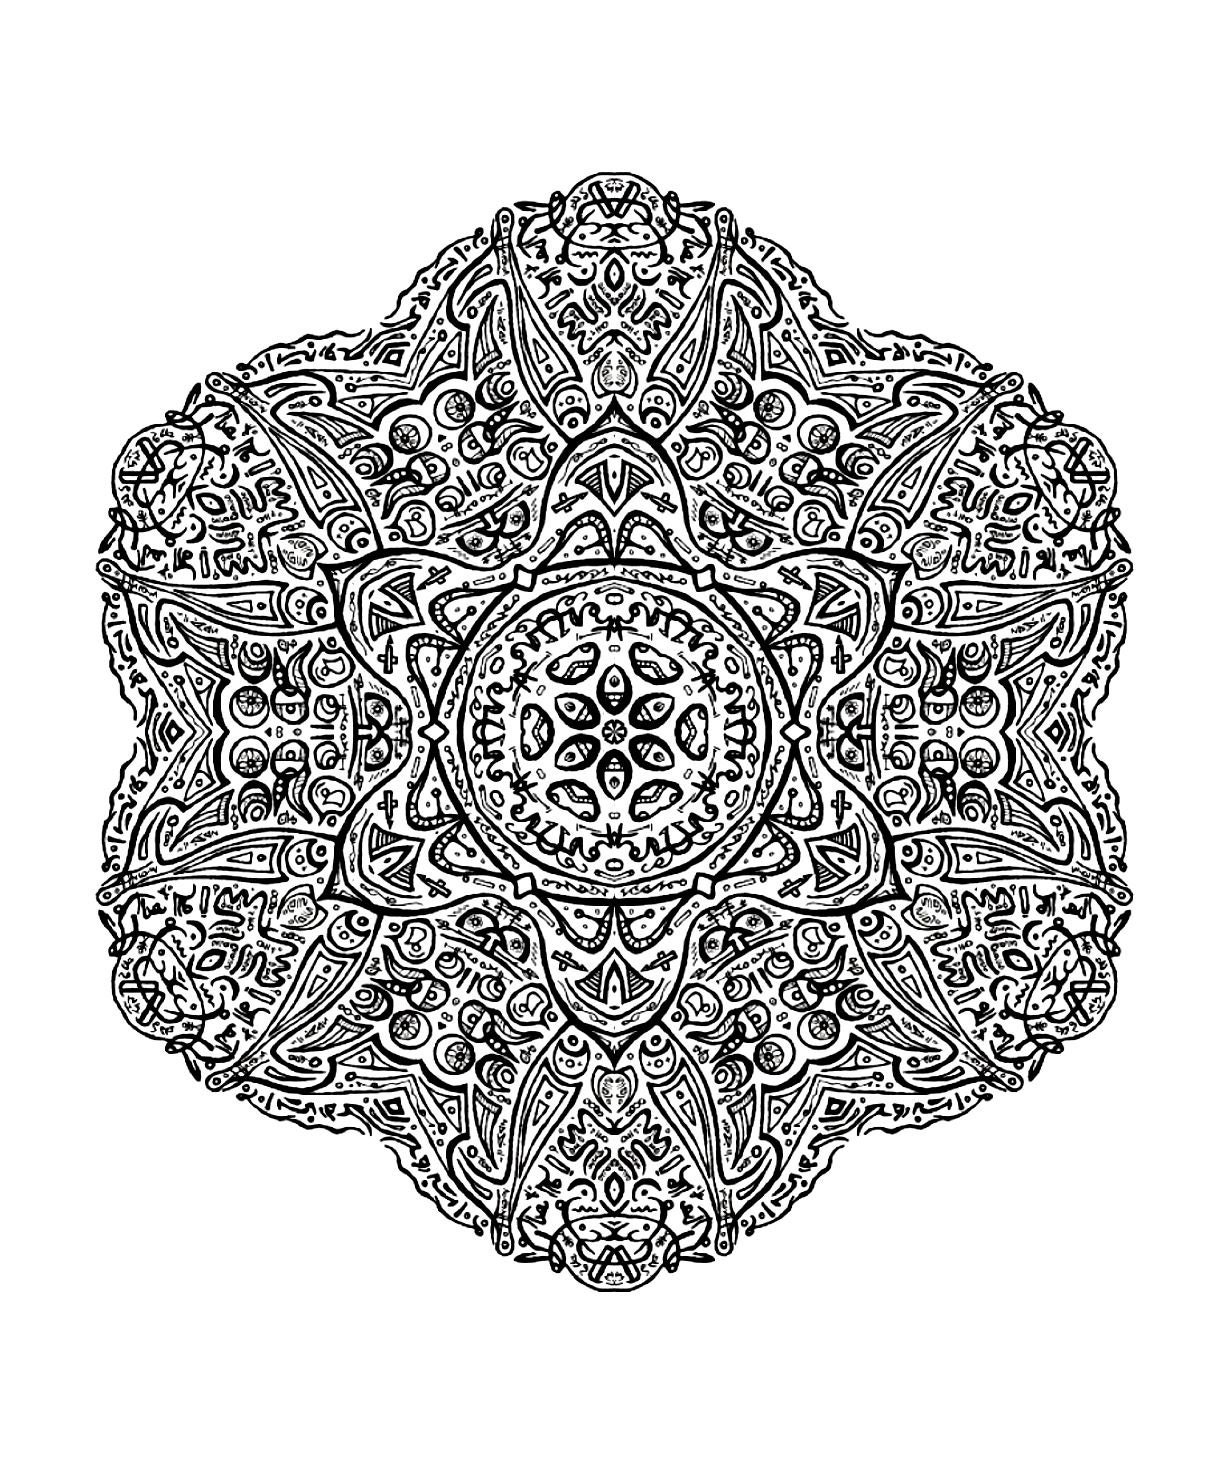 Adult Mandala Coloring Pages Coloring Book for Adults Stress Relieving  Designs : Adult Mandala Coloring Pages Featuring 50 Detailed Mandalas  Stress Relieving Designs for Adults Relaxation by Damita Victoria (2019,  Trade Paperback)